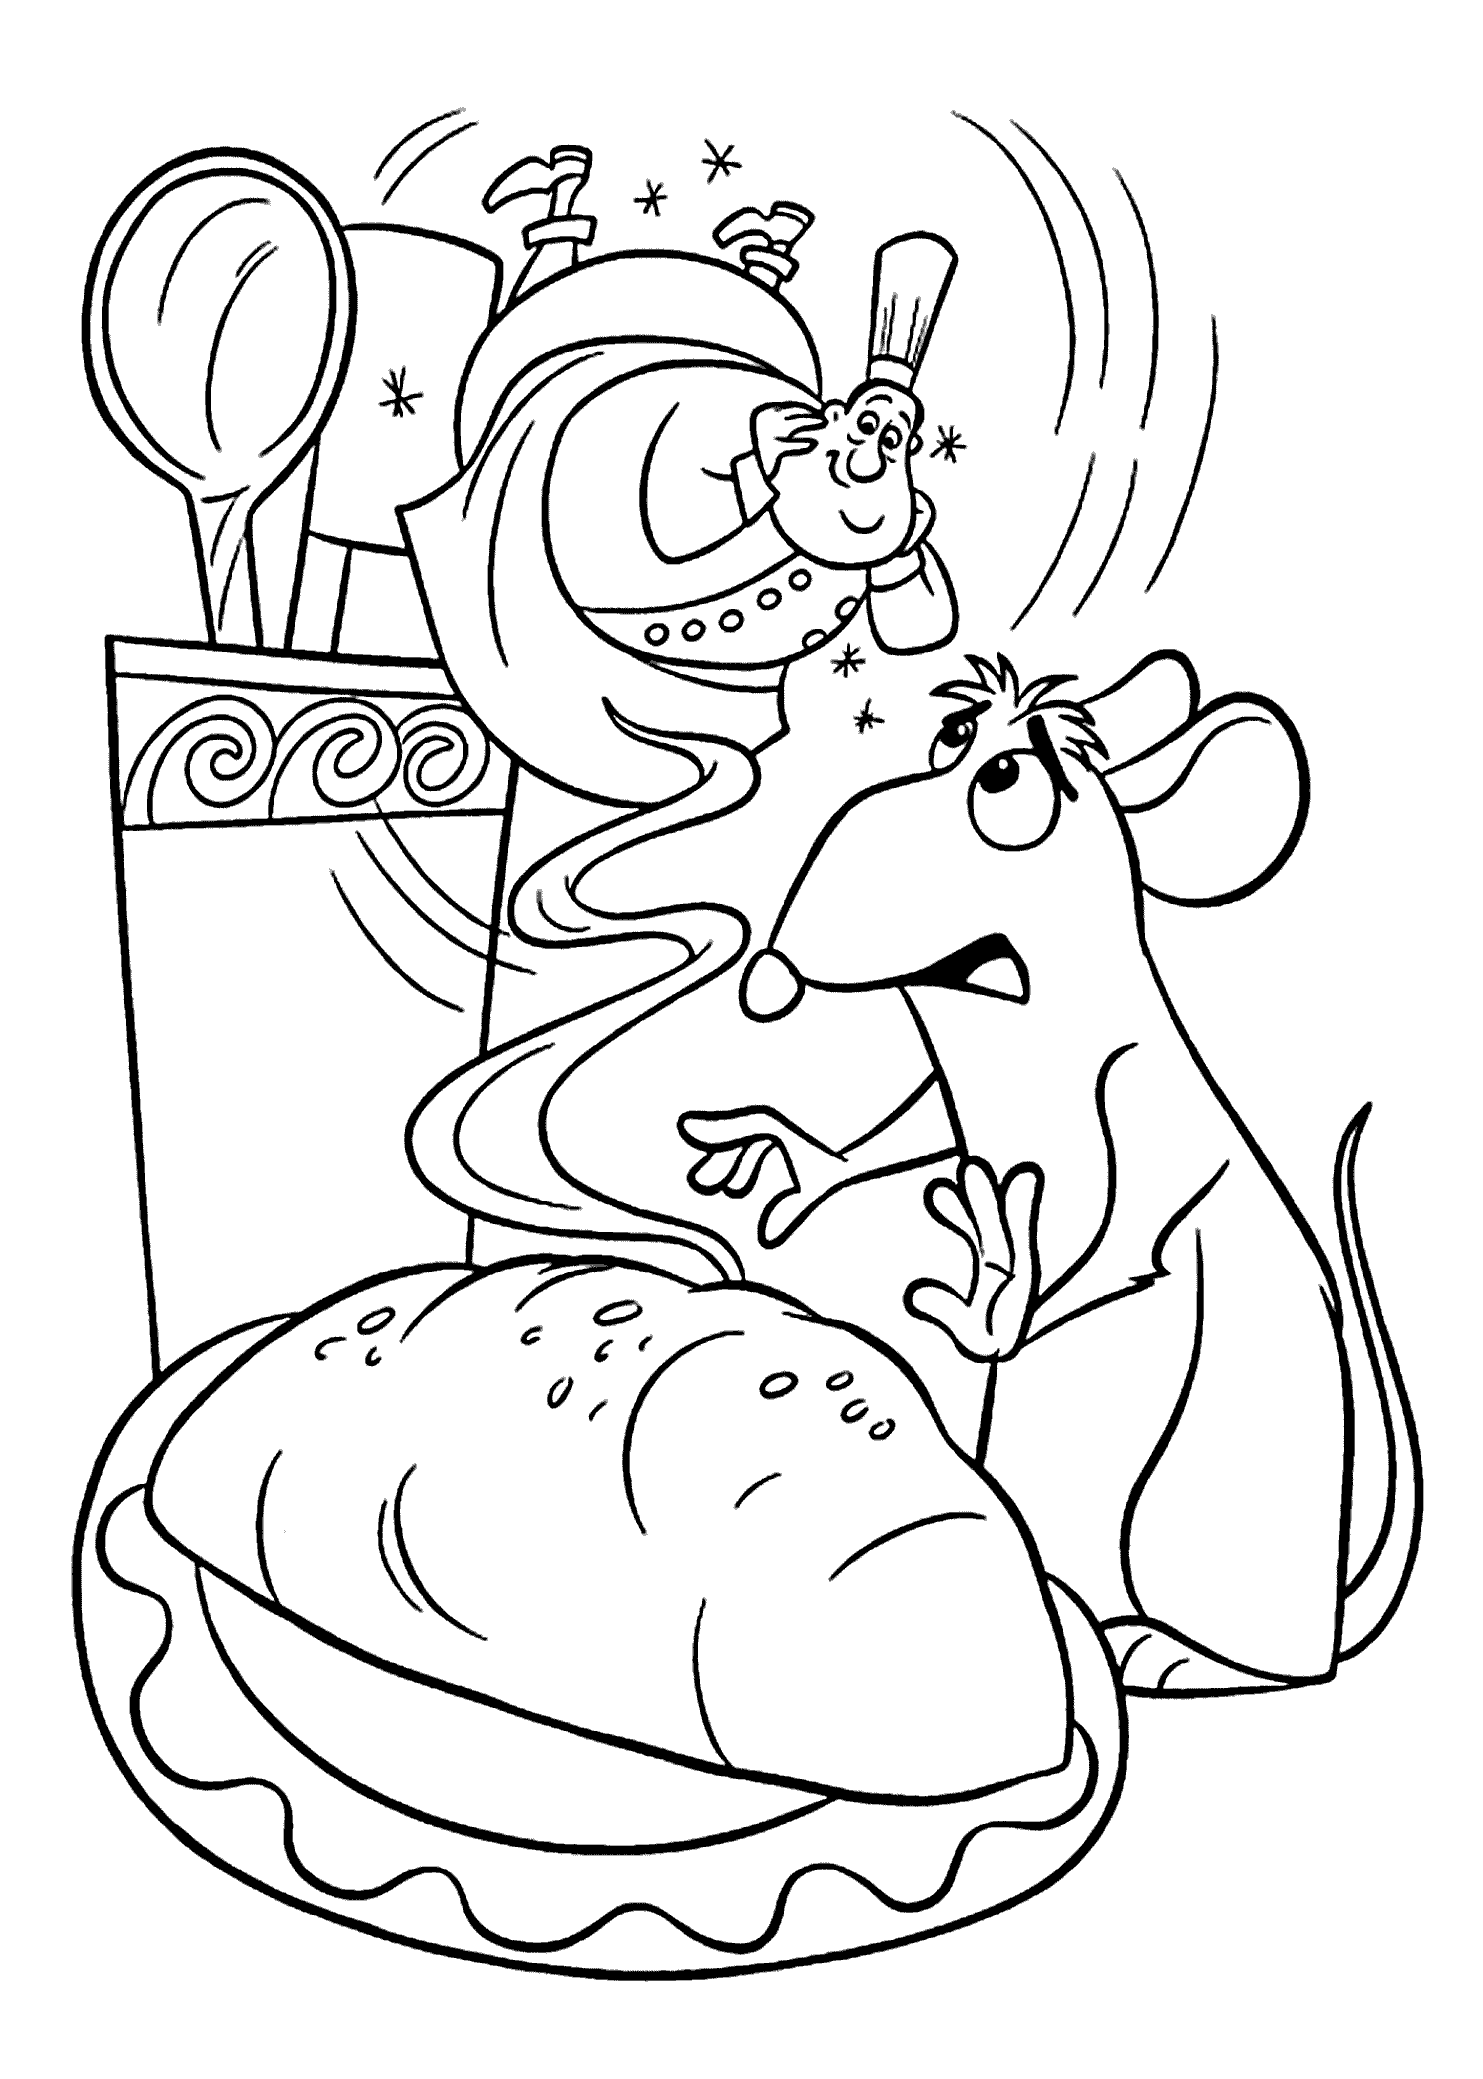 Ratatouille Coloring Pages - Free Printable Coloring Pages for Kids